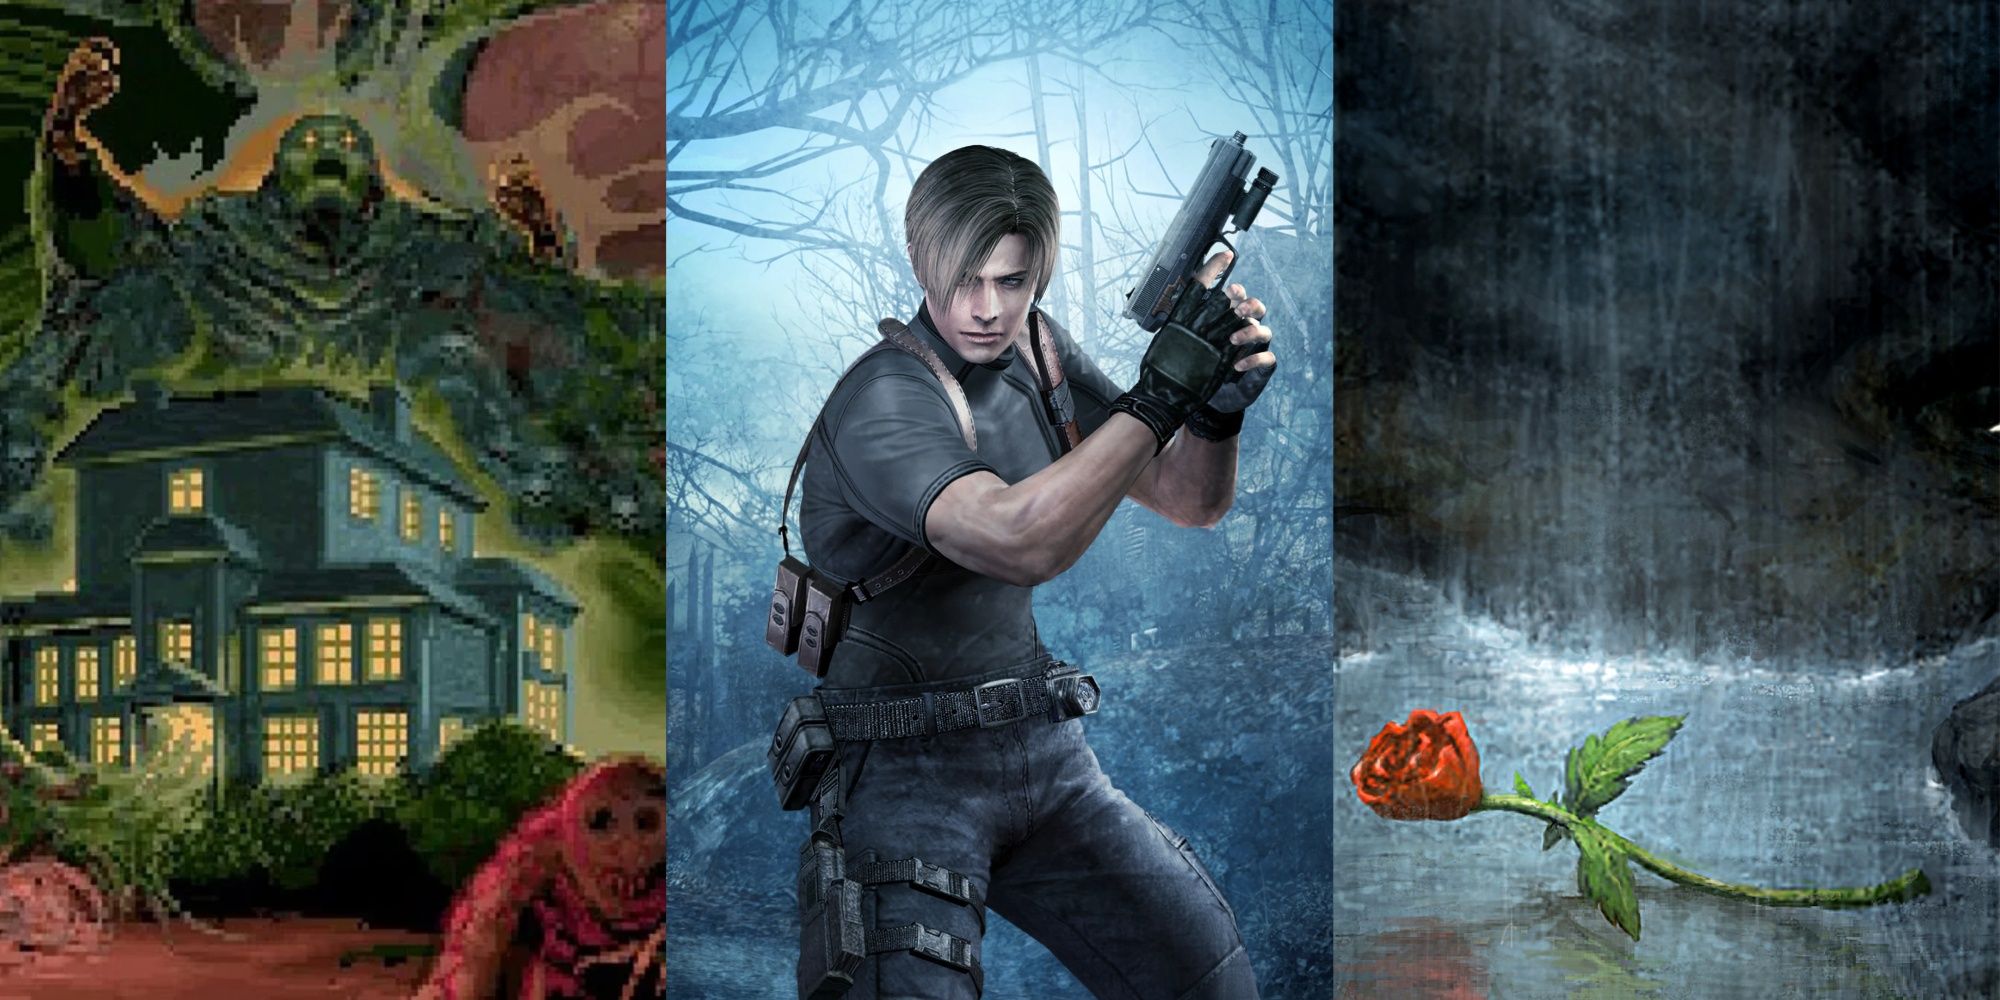 A famous splash screen from Alone in the Dark, key art from Resident Evil 4, and the box art to Amnesia.